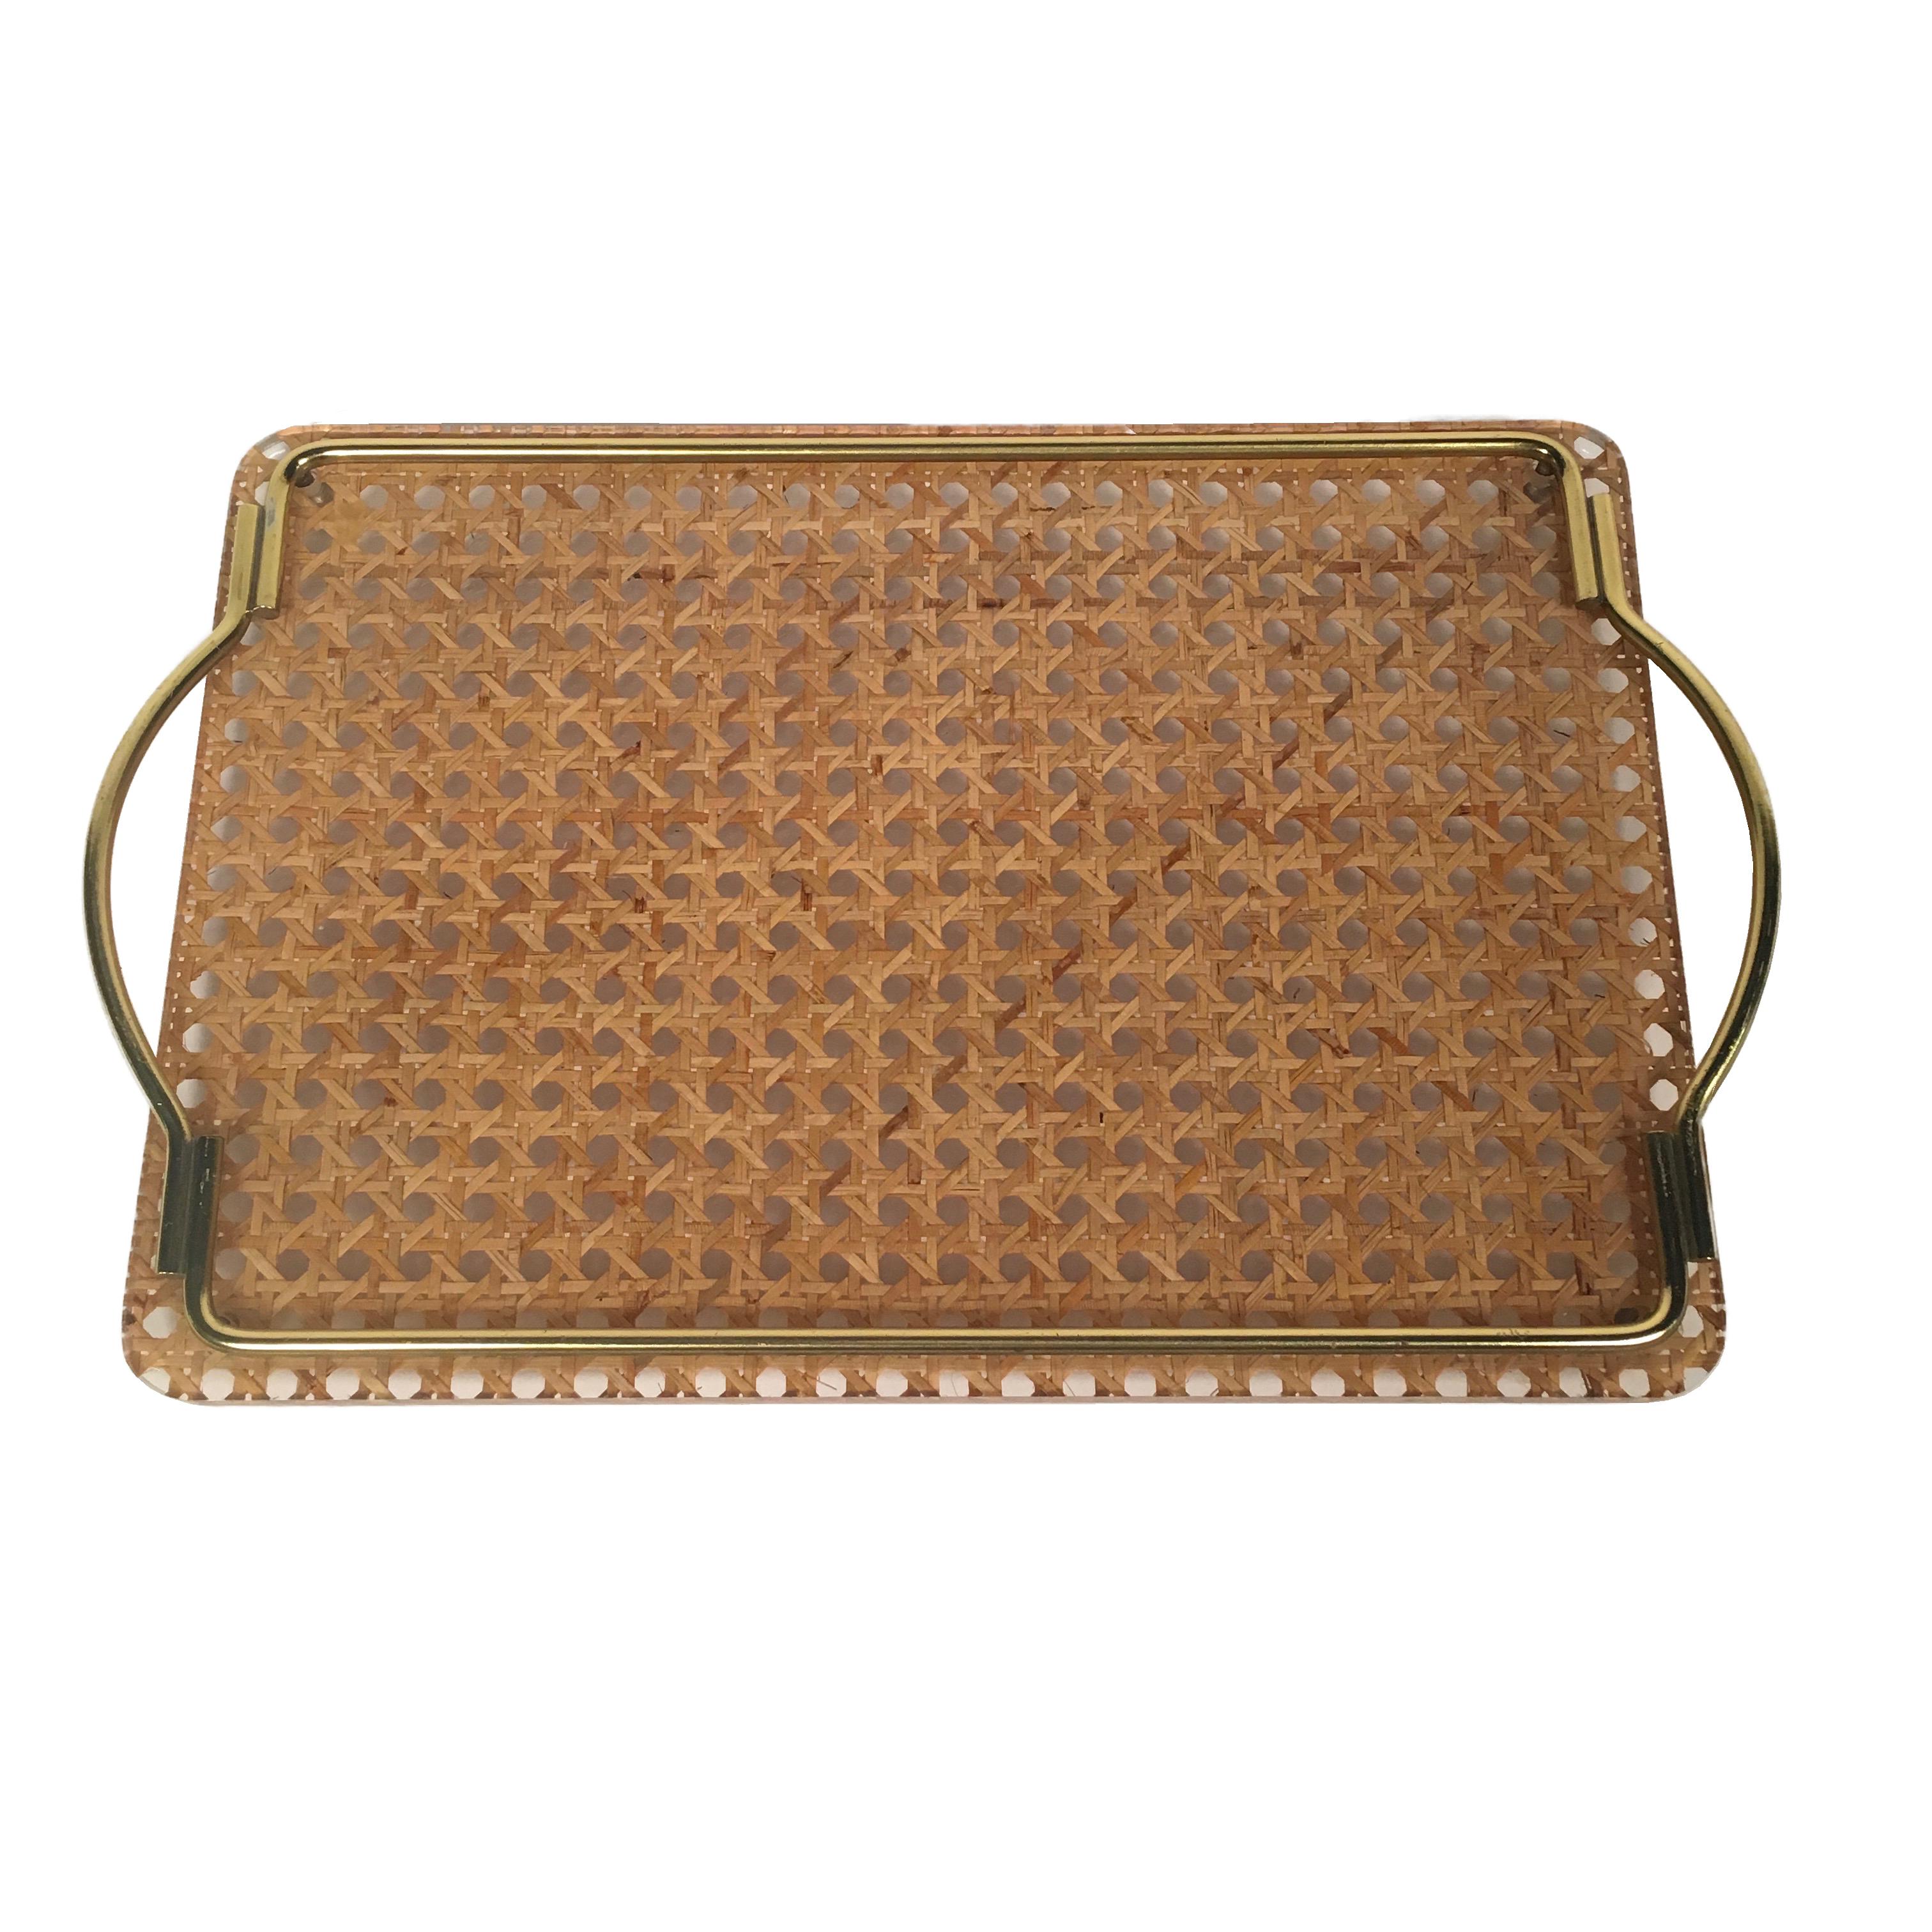 Midcentury Brass, Lucite and Rattan Serving Tray Christian Dior Home Collection